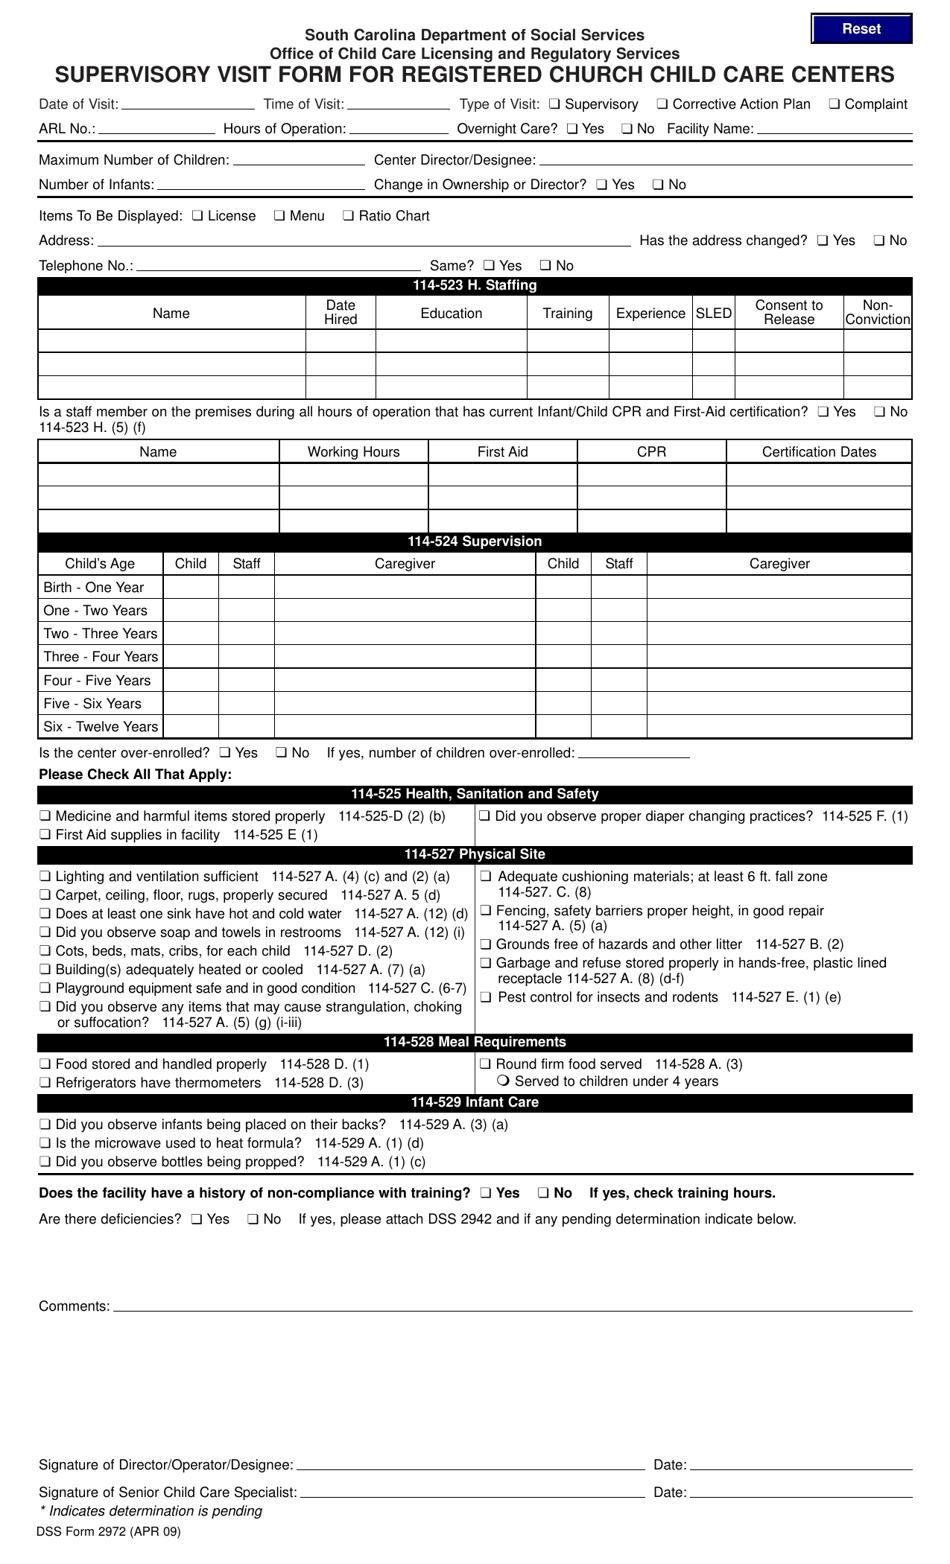 DSS Form 2972 Supervisory Visit Form for Registered Church Child Care Centers - South Carolina, Page 1